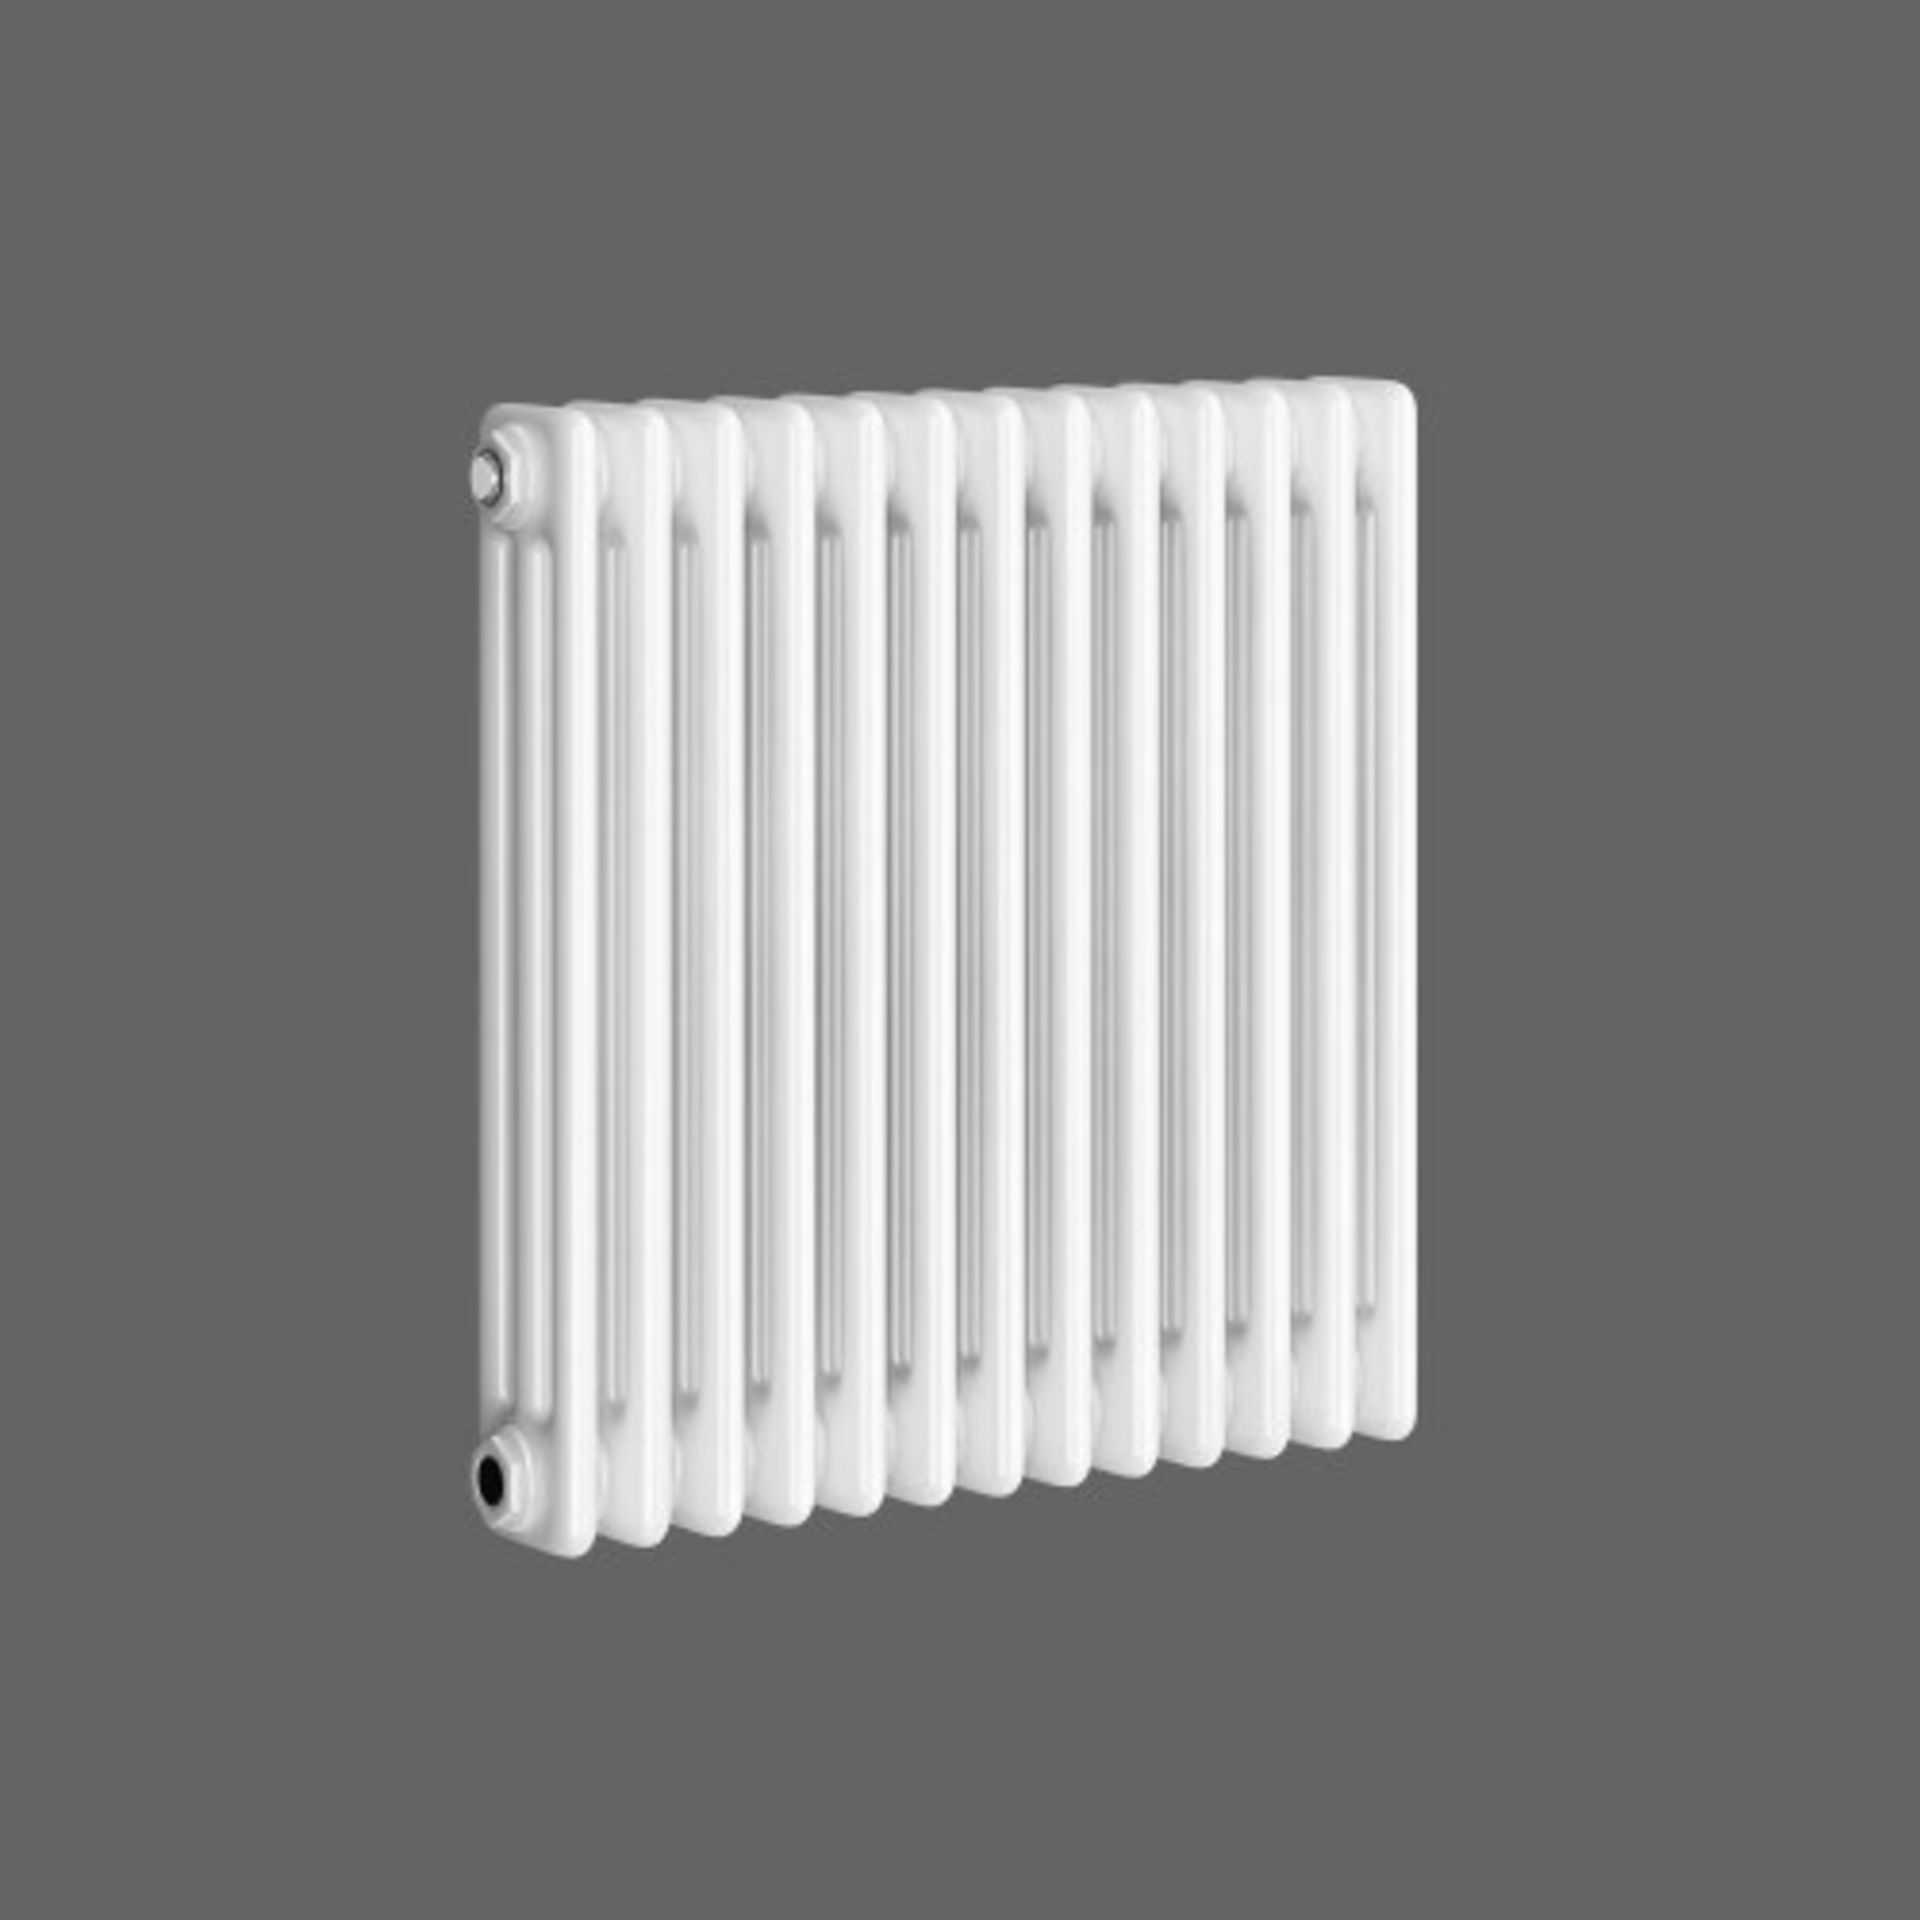 Brand New 600x600mm White Triple Panel Horizontal Colosseum Traditional Radiator.RRP £399.99.For ele - Image 2 of 2